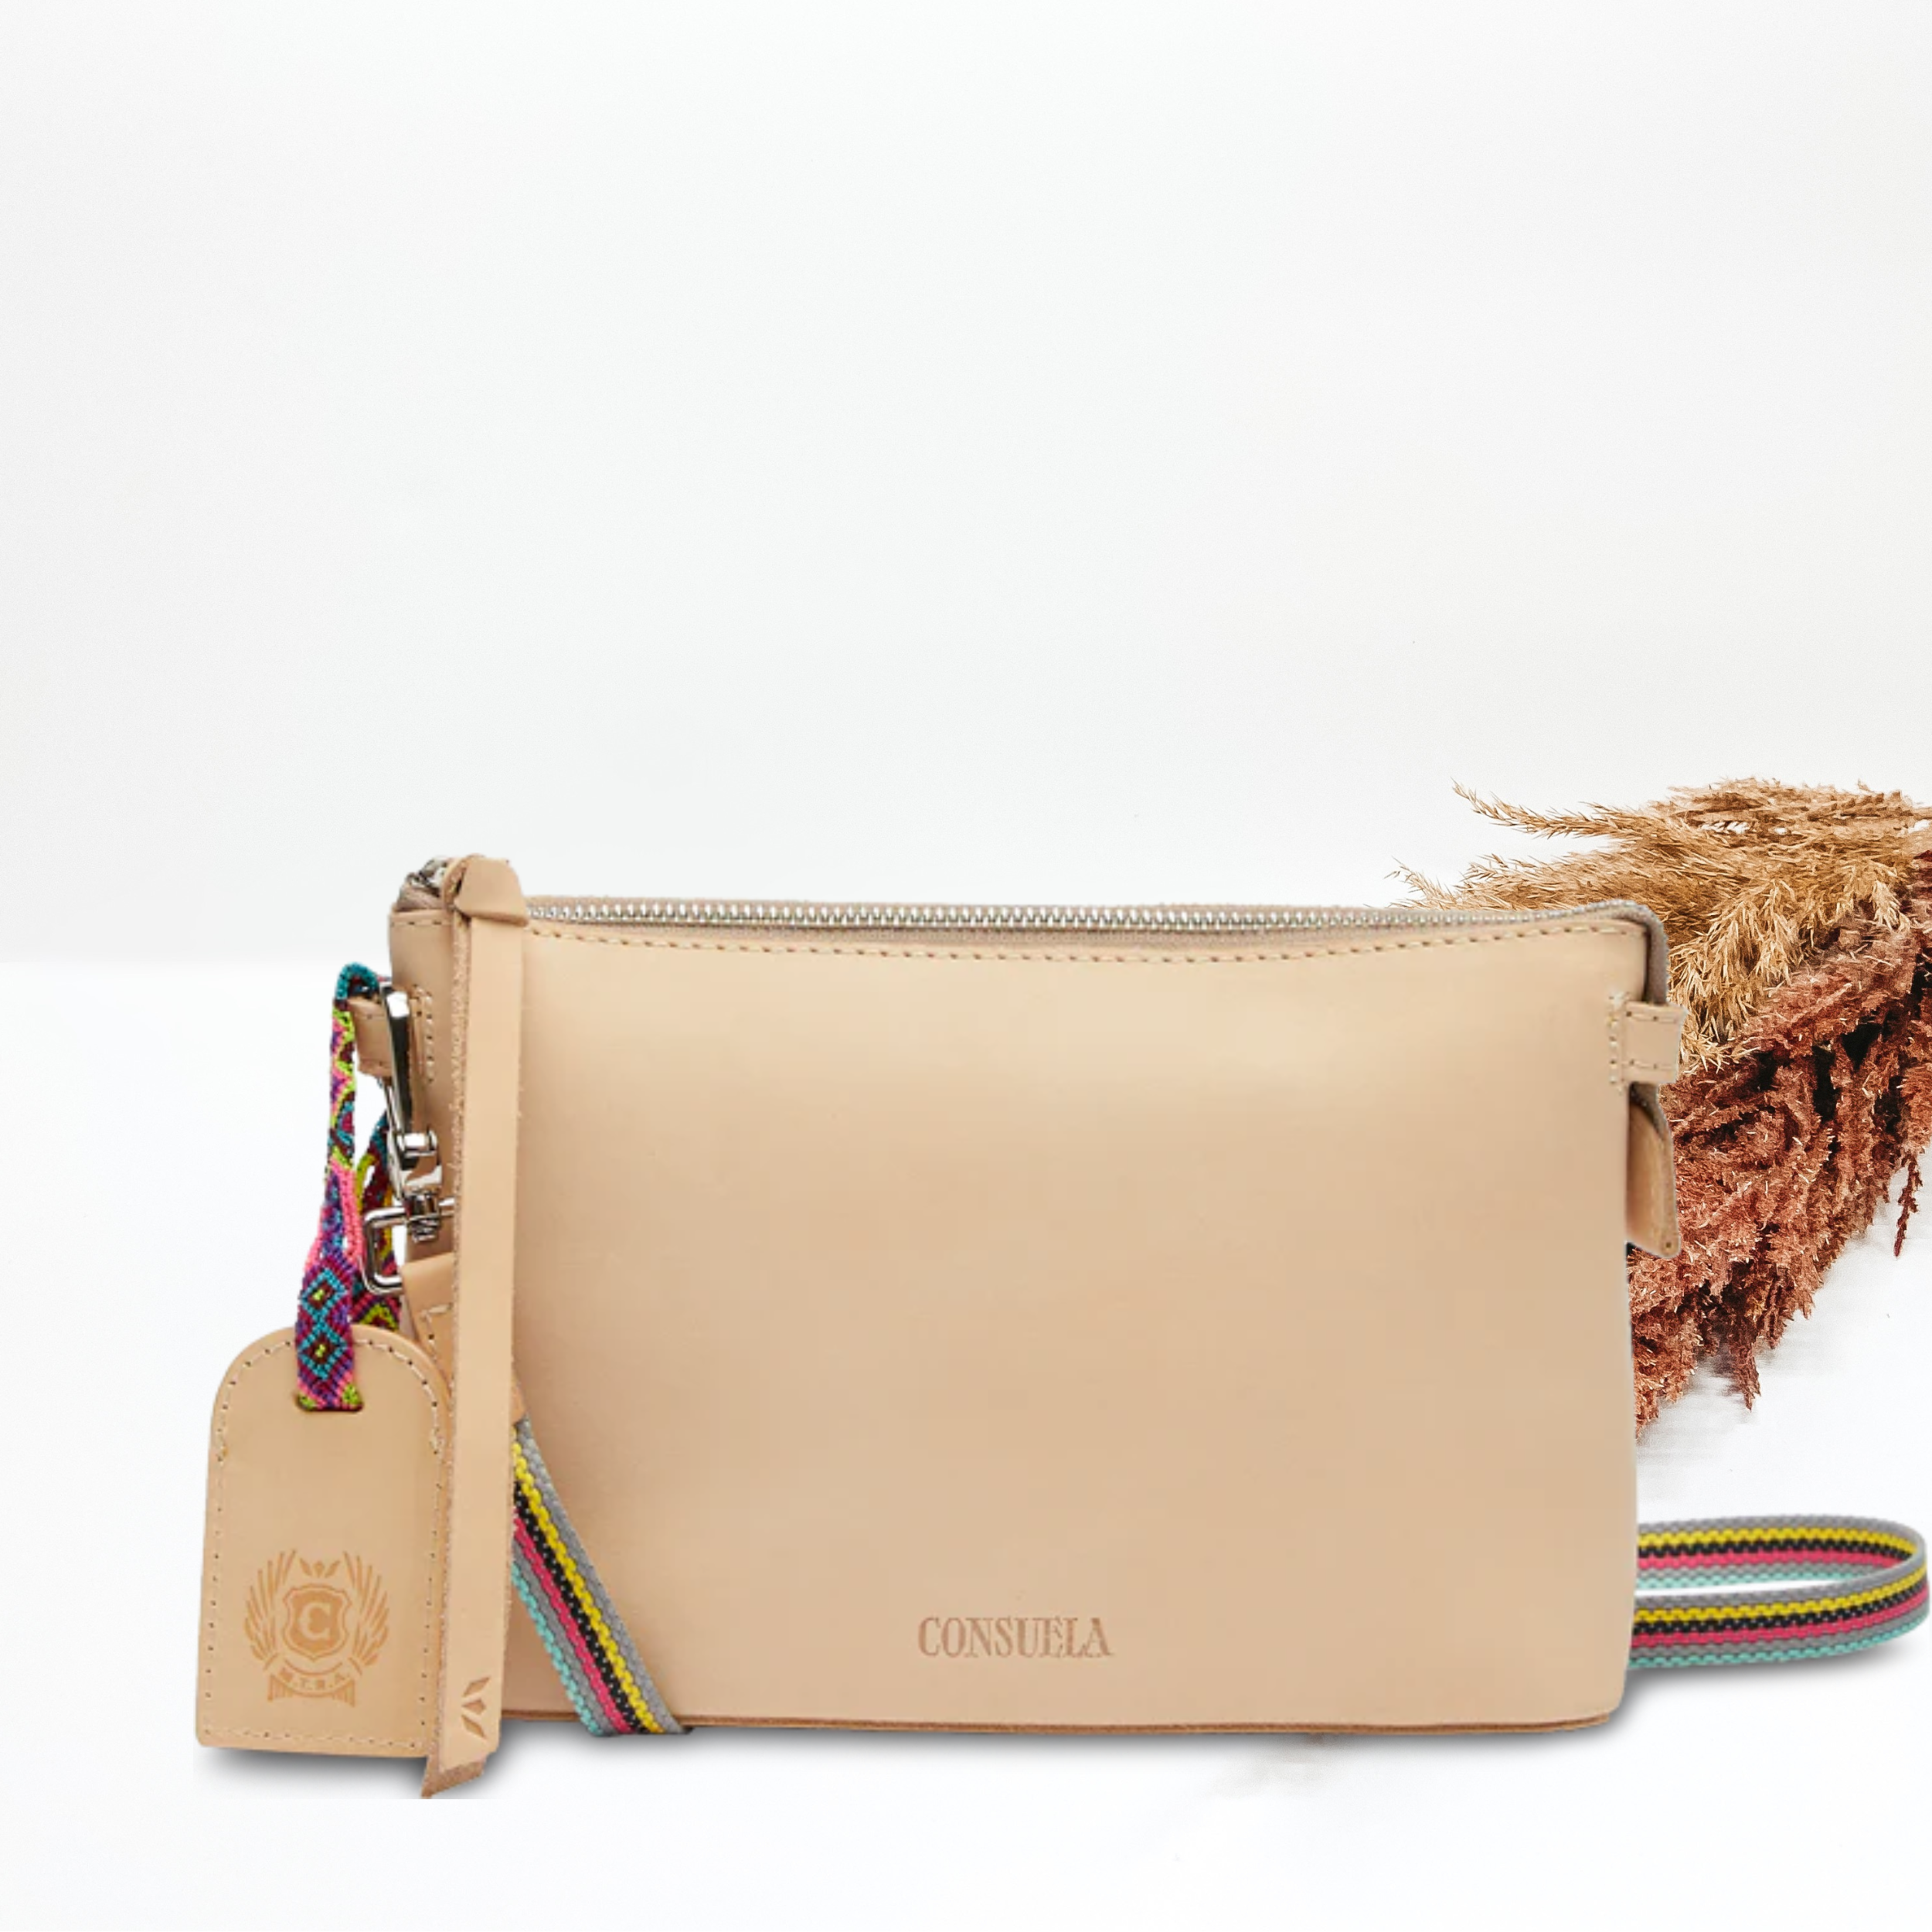 A light brown leather purse with a crossbody strap. Pictured on white background with brown pompous grass on the right side. 